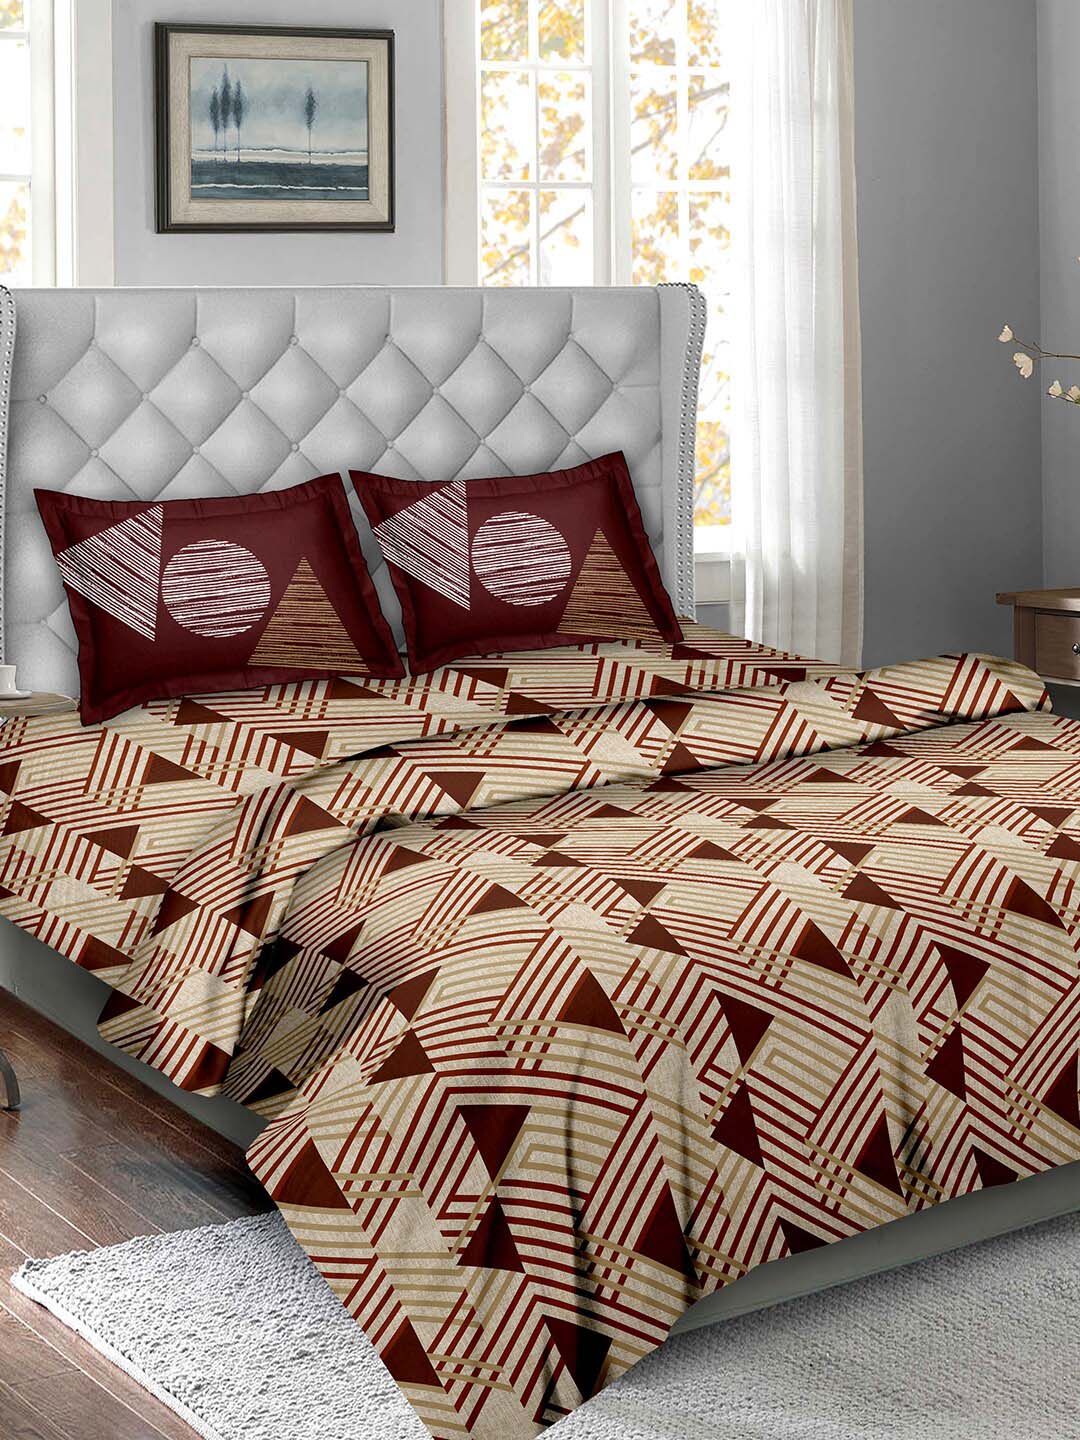 BELLA CASA Beige & Maroon Printed Pure Cotton 180 TC Double King Bedding Set Price in India